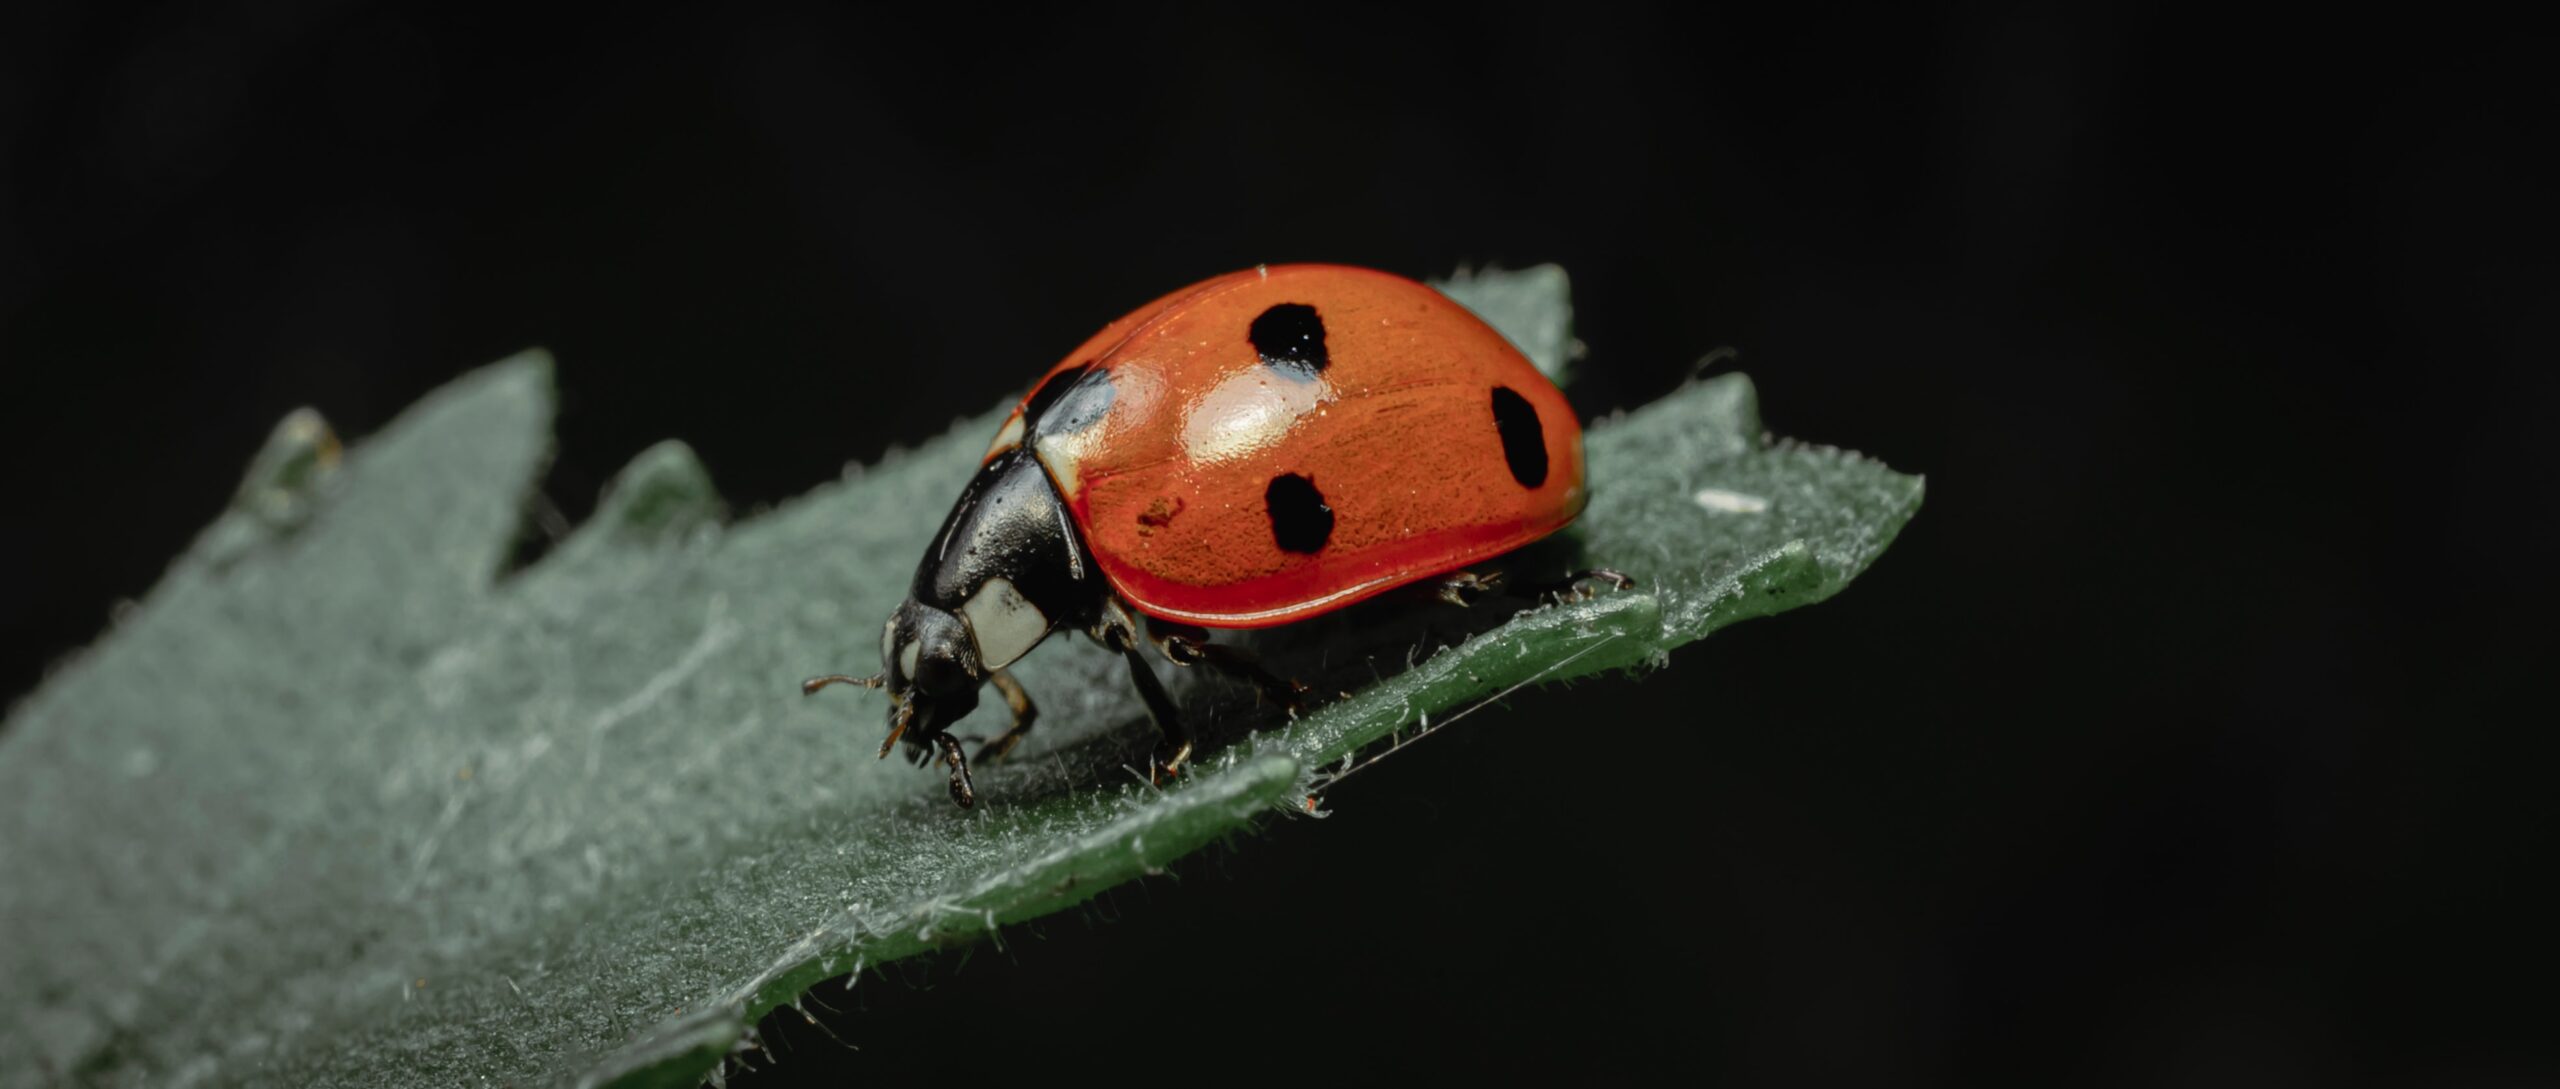 what does it mean when a ladybug has no spots